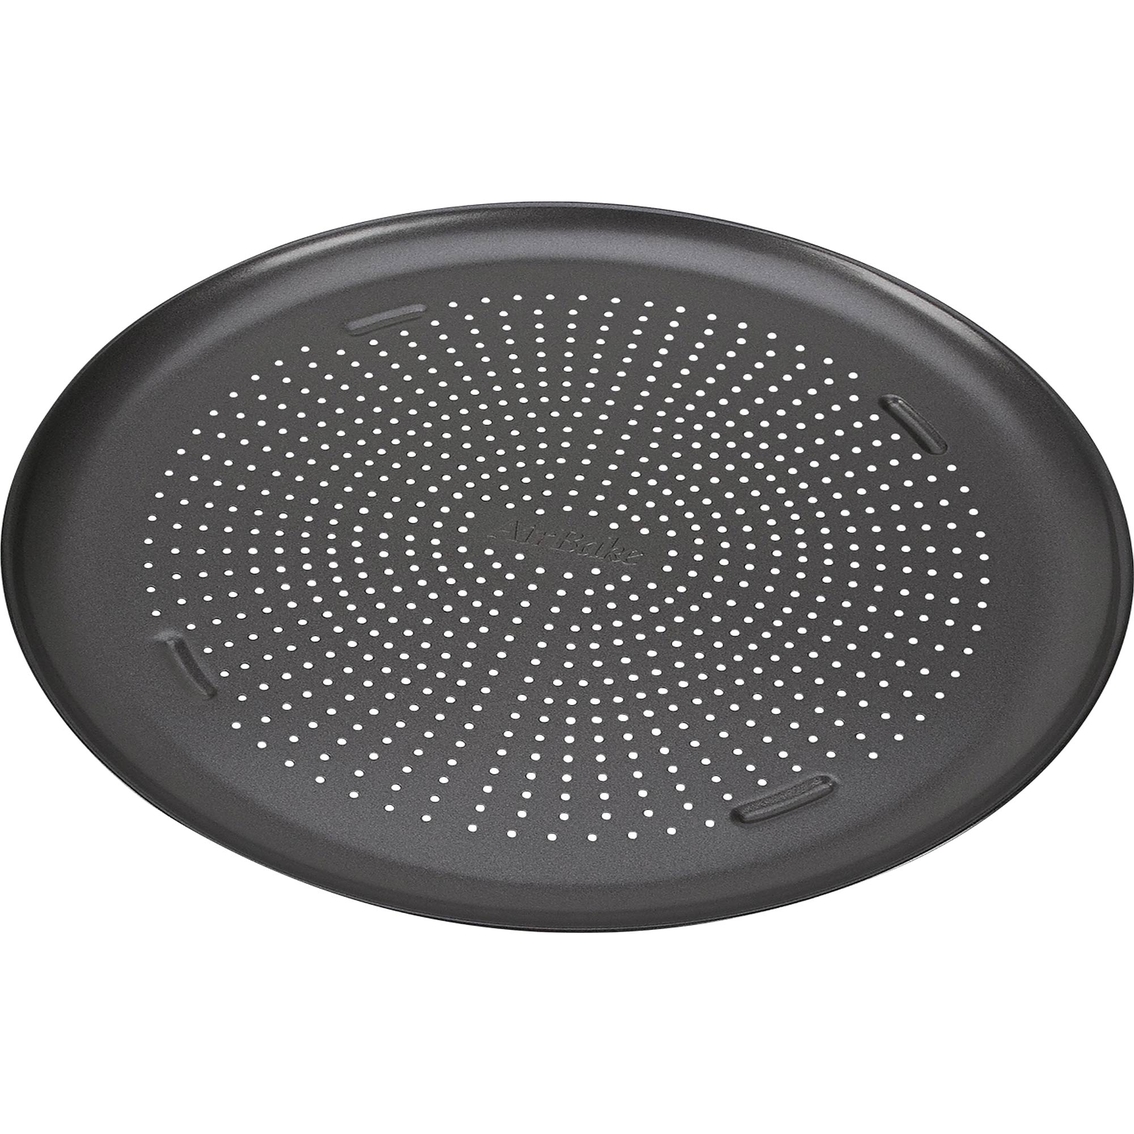 T-fal Airbake 15.75 In. Large Nonstick Pizza Pan, Baking Pans, Household